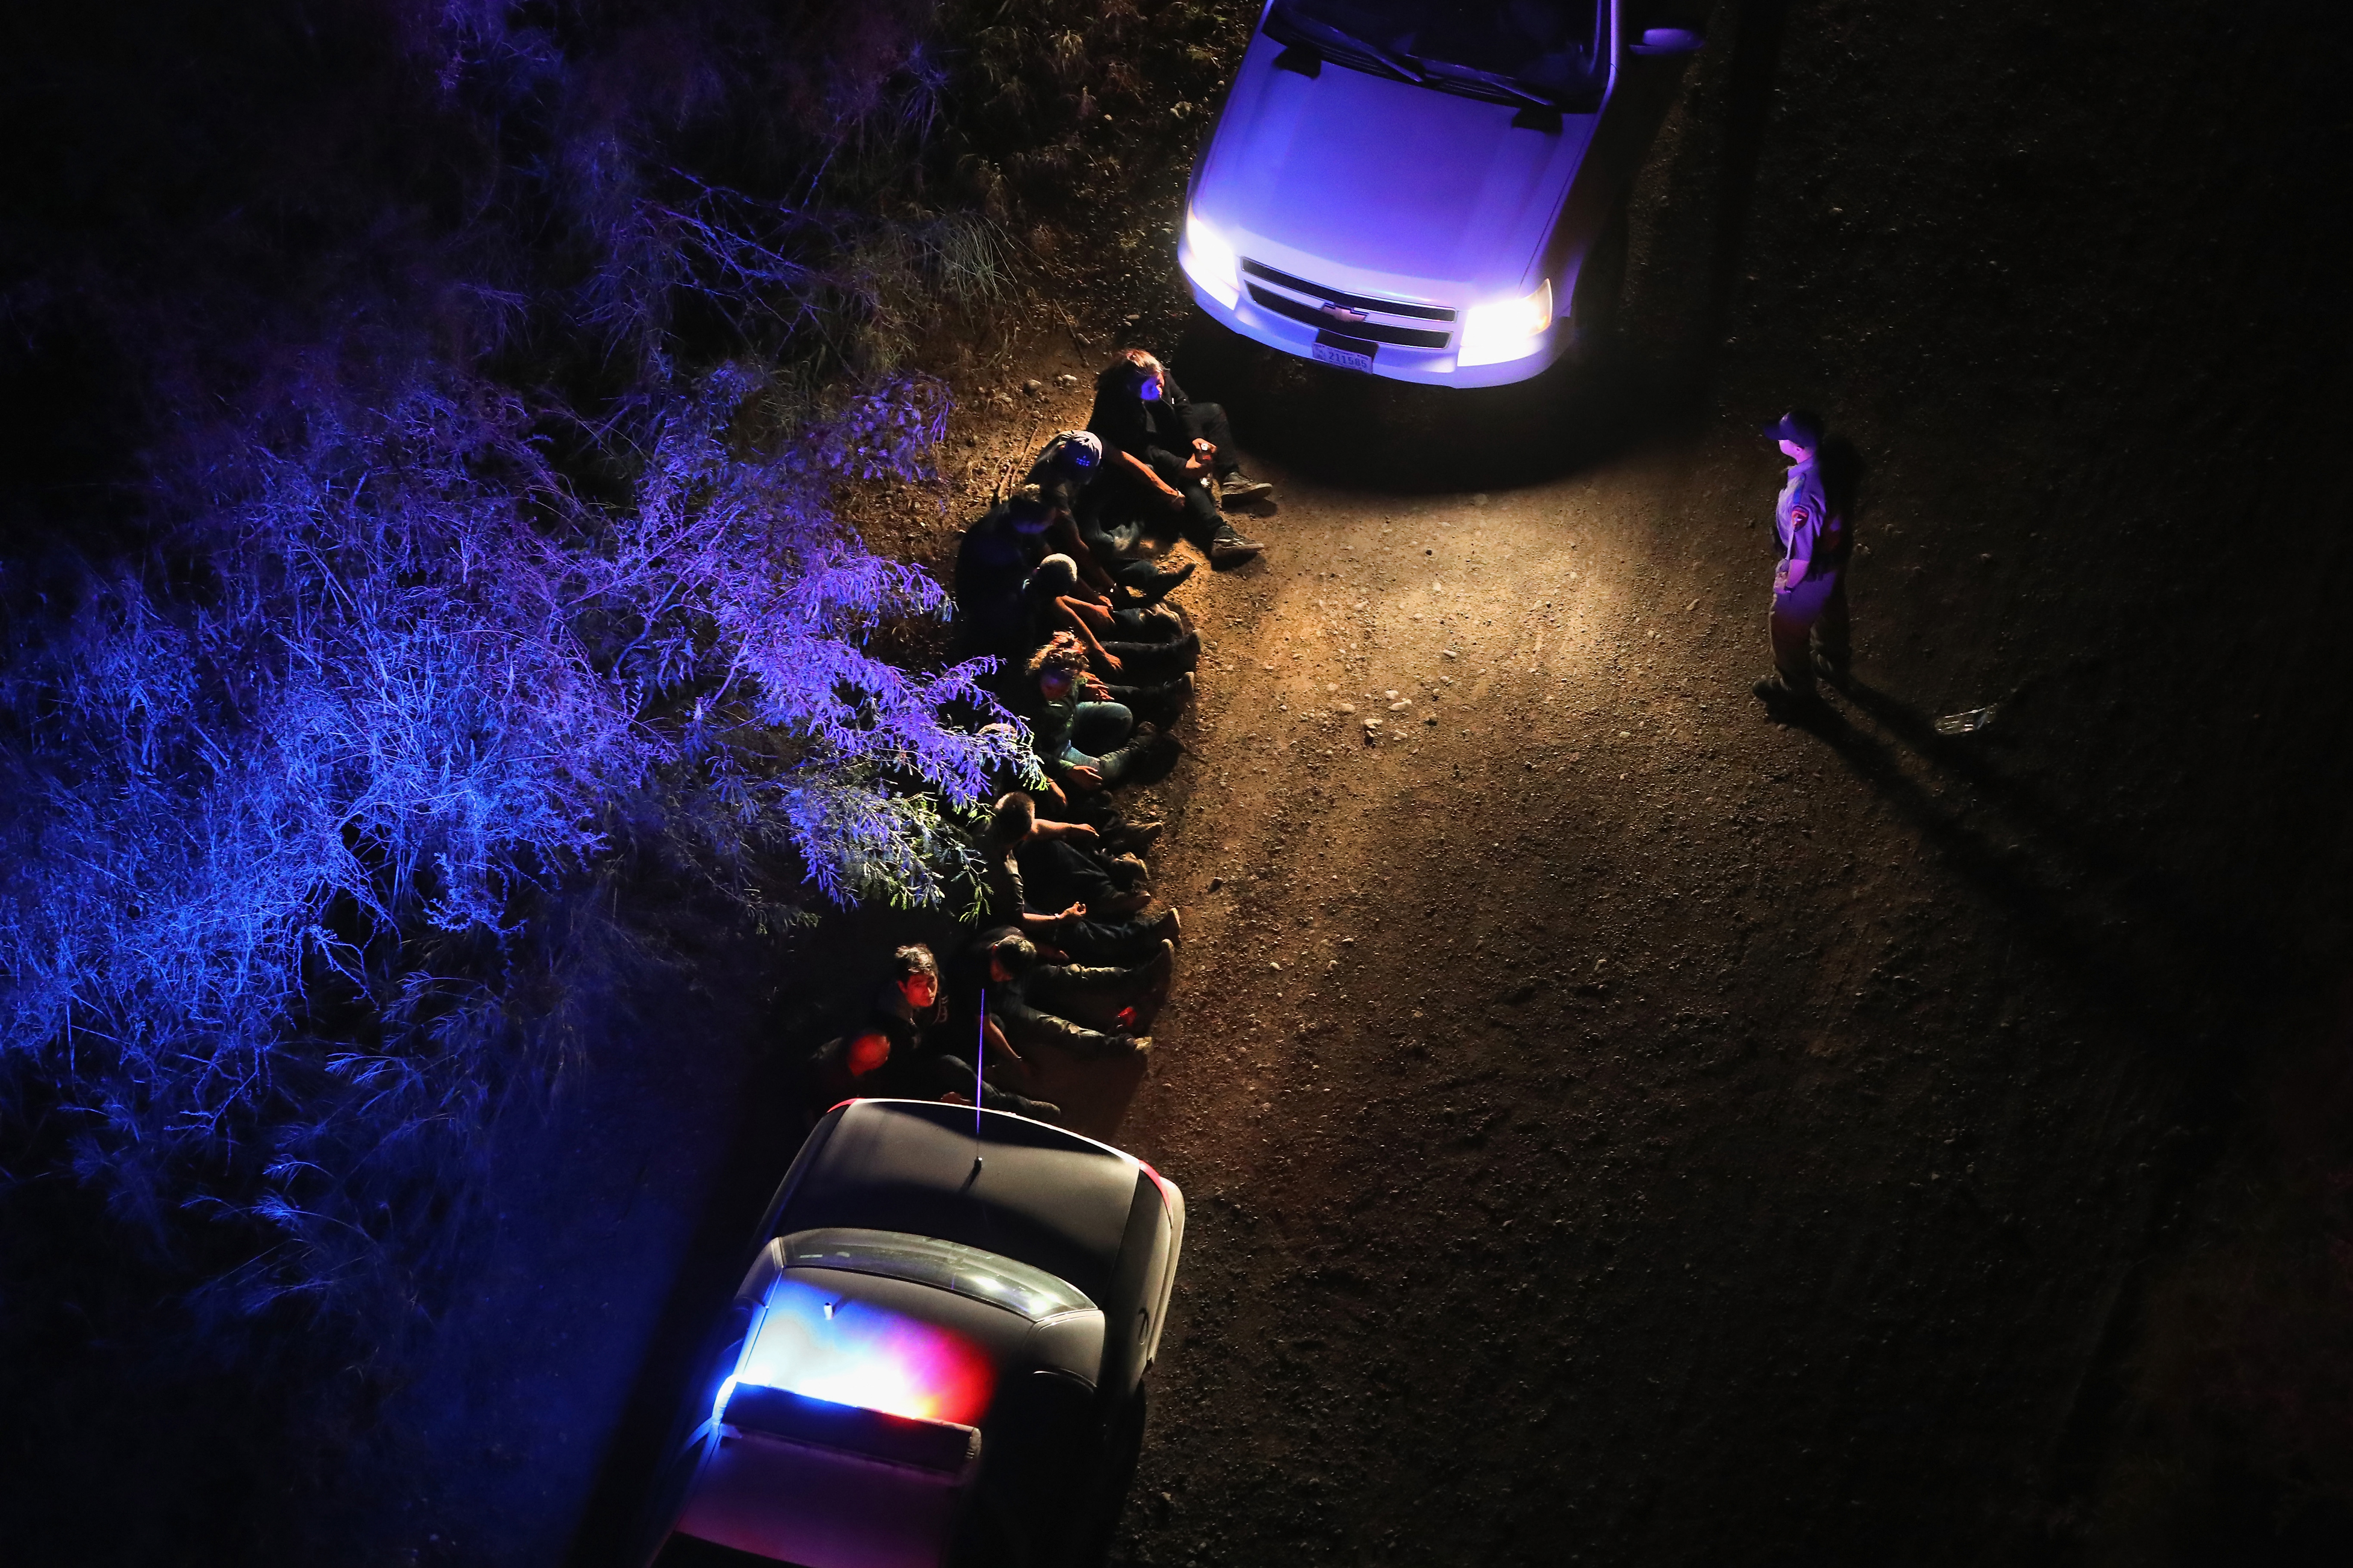 U.S. Border Patrol agents take undocumented immigrants into custody after capturing them after they crossed Rio Grande from Mexico into Texas near Sullivan City, Texas on Aug. 18, 2016. (John Moore—Getty Images)